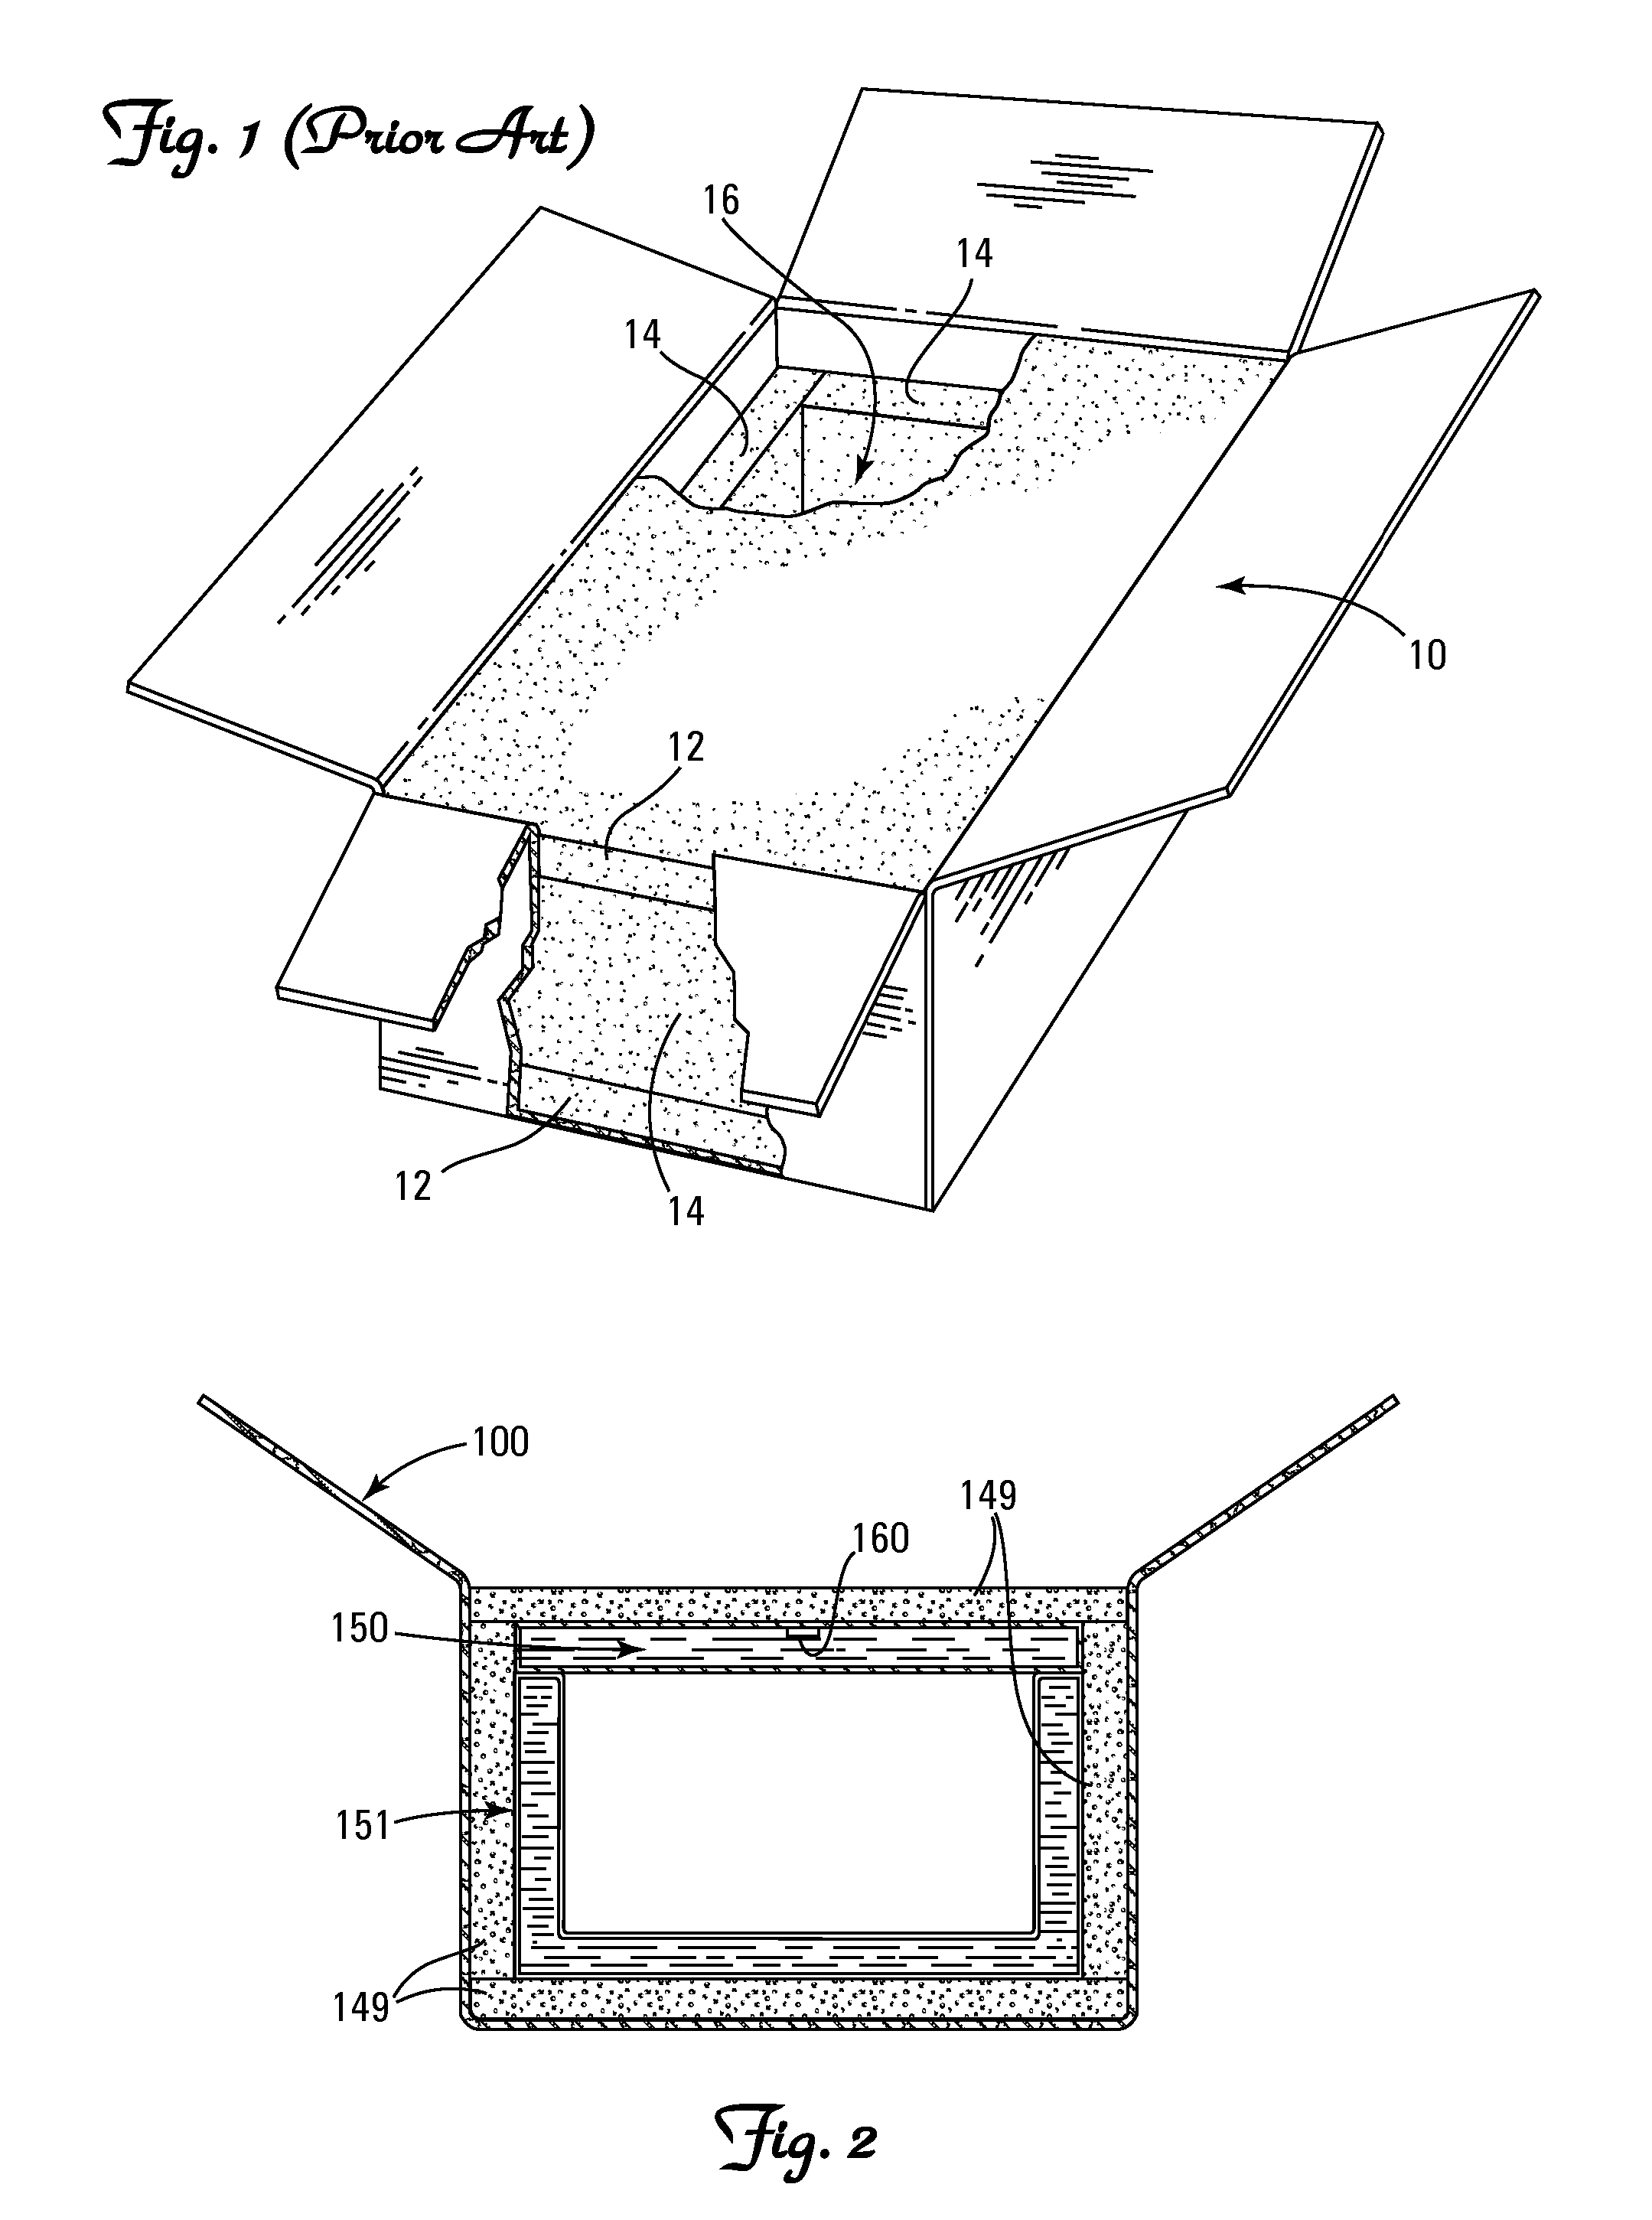 Travel container with passive thermal control and a flexibile outer shell